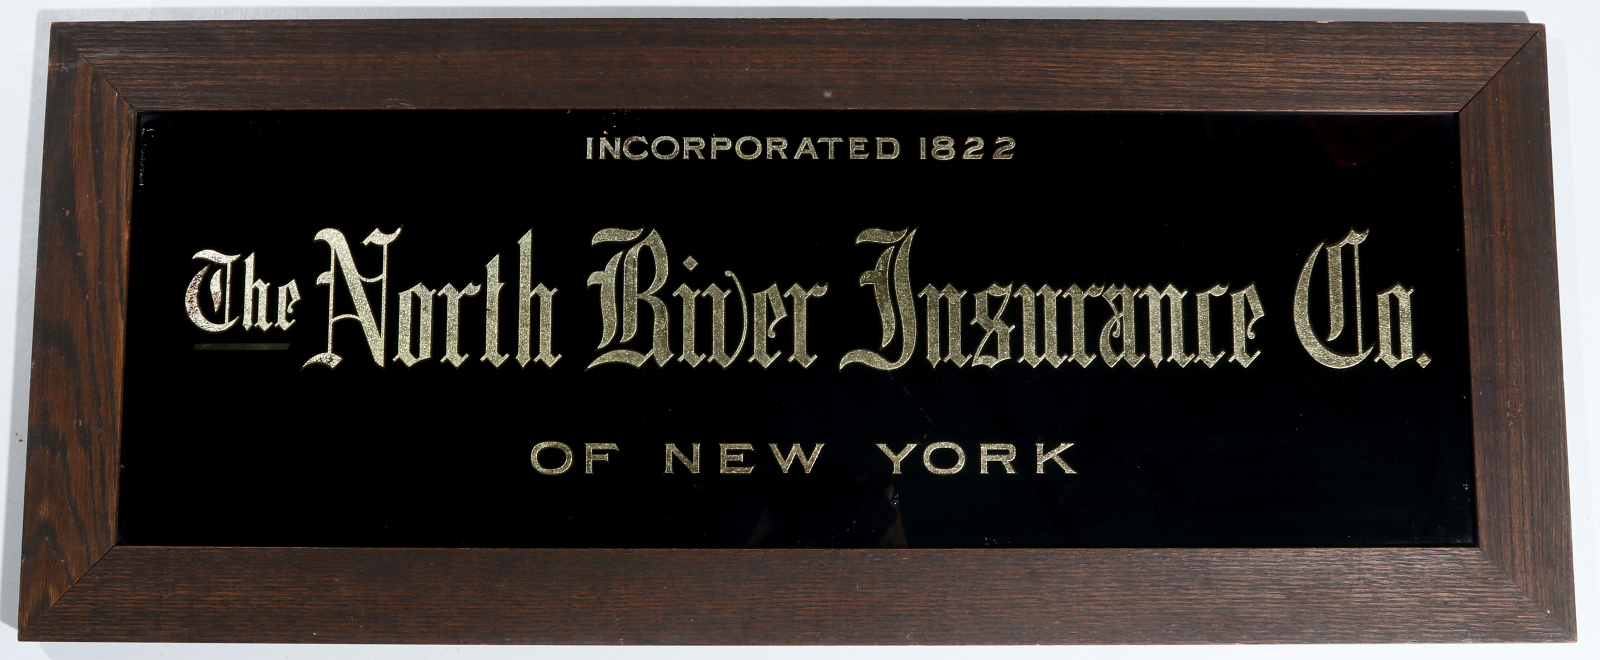 THE NORTH RIVER INSURANCE CO. REVERSE PAINTED SIGN